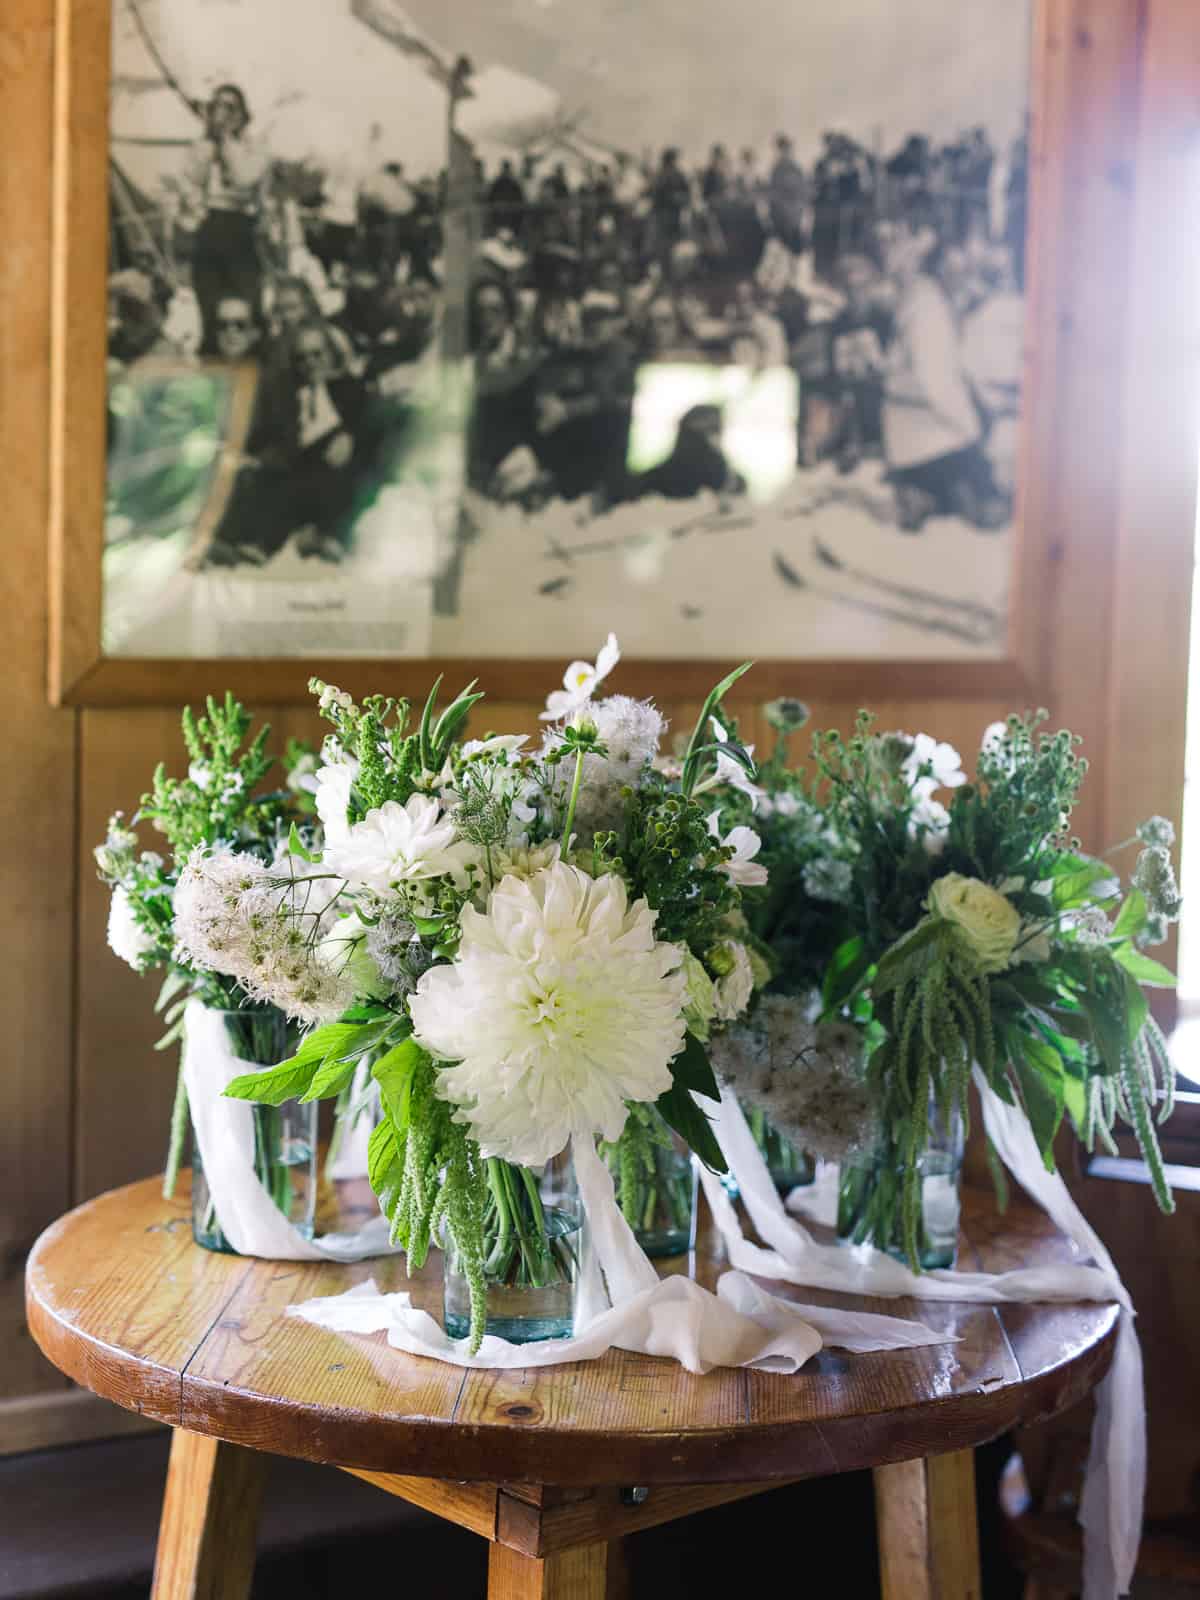 bouquets in vases on wood table with old framed photo